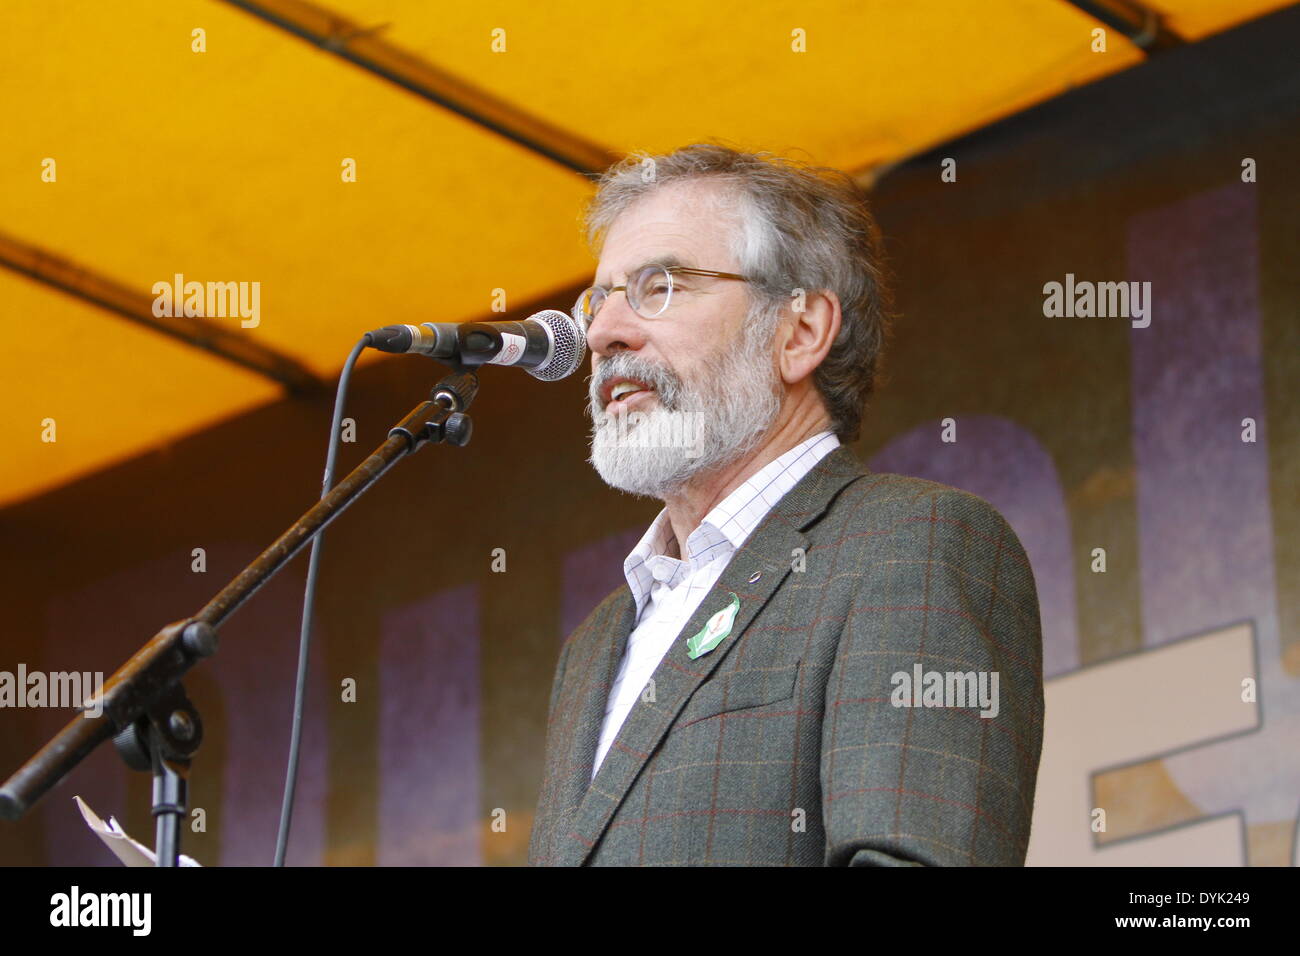 Dublin, Ireland. 20th April 2014. Sinn Fein president Gerry Adams addresses the commemoration. Sinn Fein president Gerry Adams led the Sinn Fein commemoration of the 98th anniversary of the Easter Rising of 1916. The party supporters marched from the Garden of Remembrance to the General Post office (GPO) for a rally. Credit:  Michael Debets/Alamy Live News Stock Photo